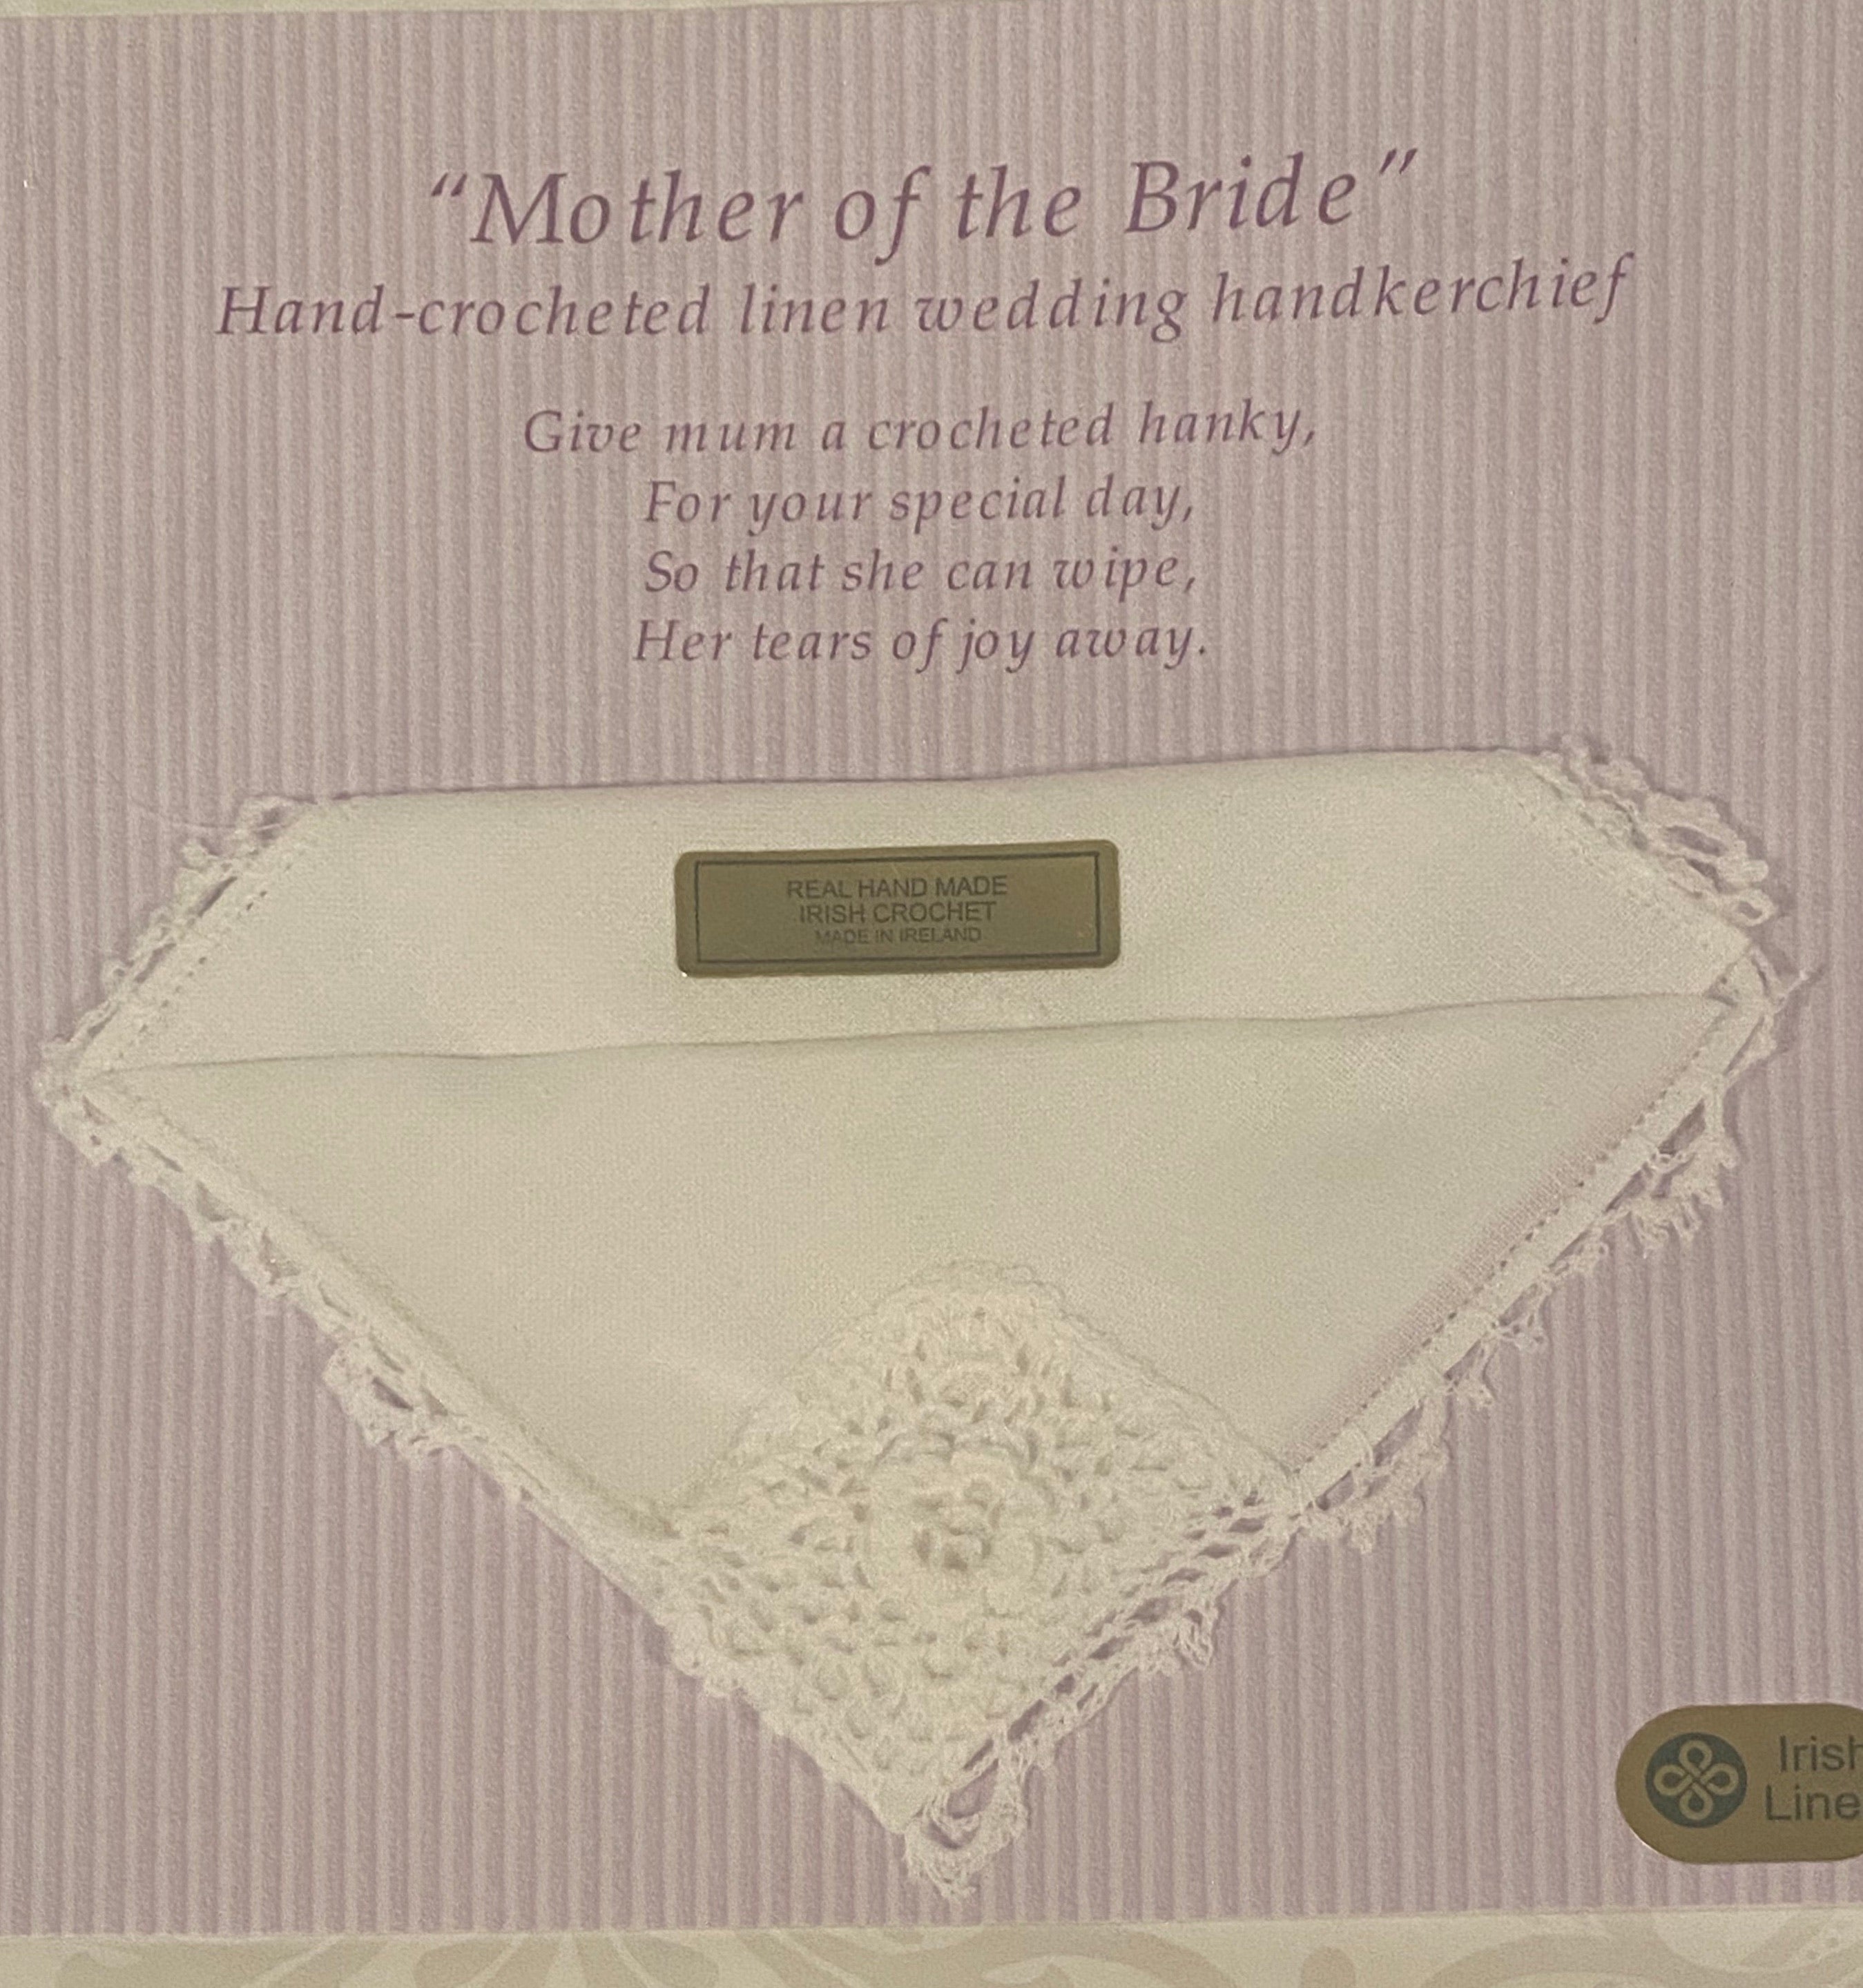 “Mother of the bride” hanky